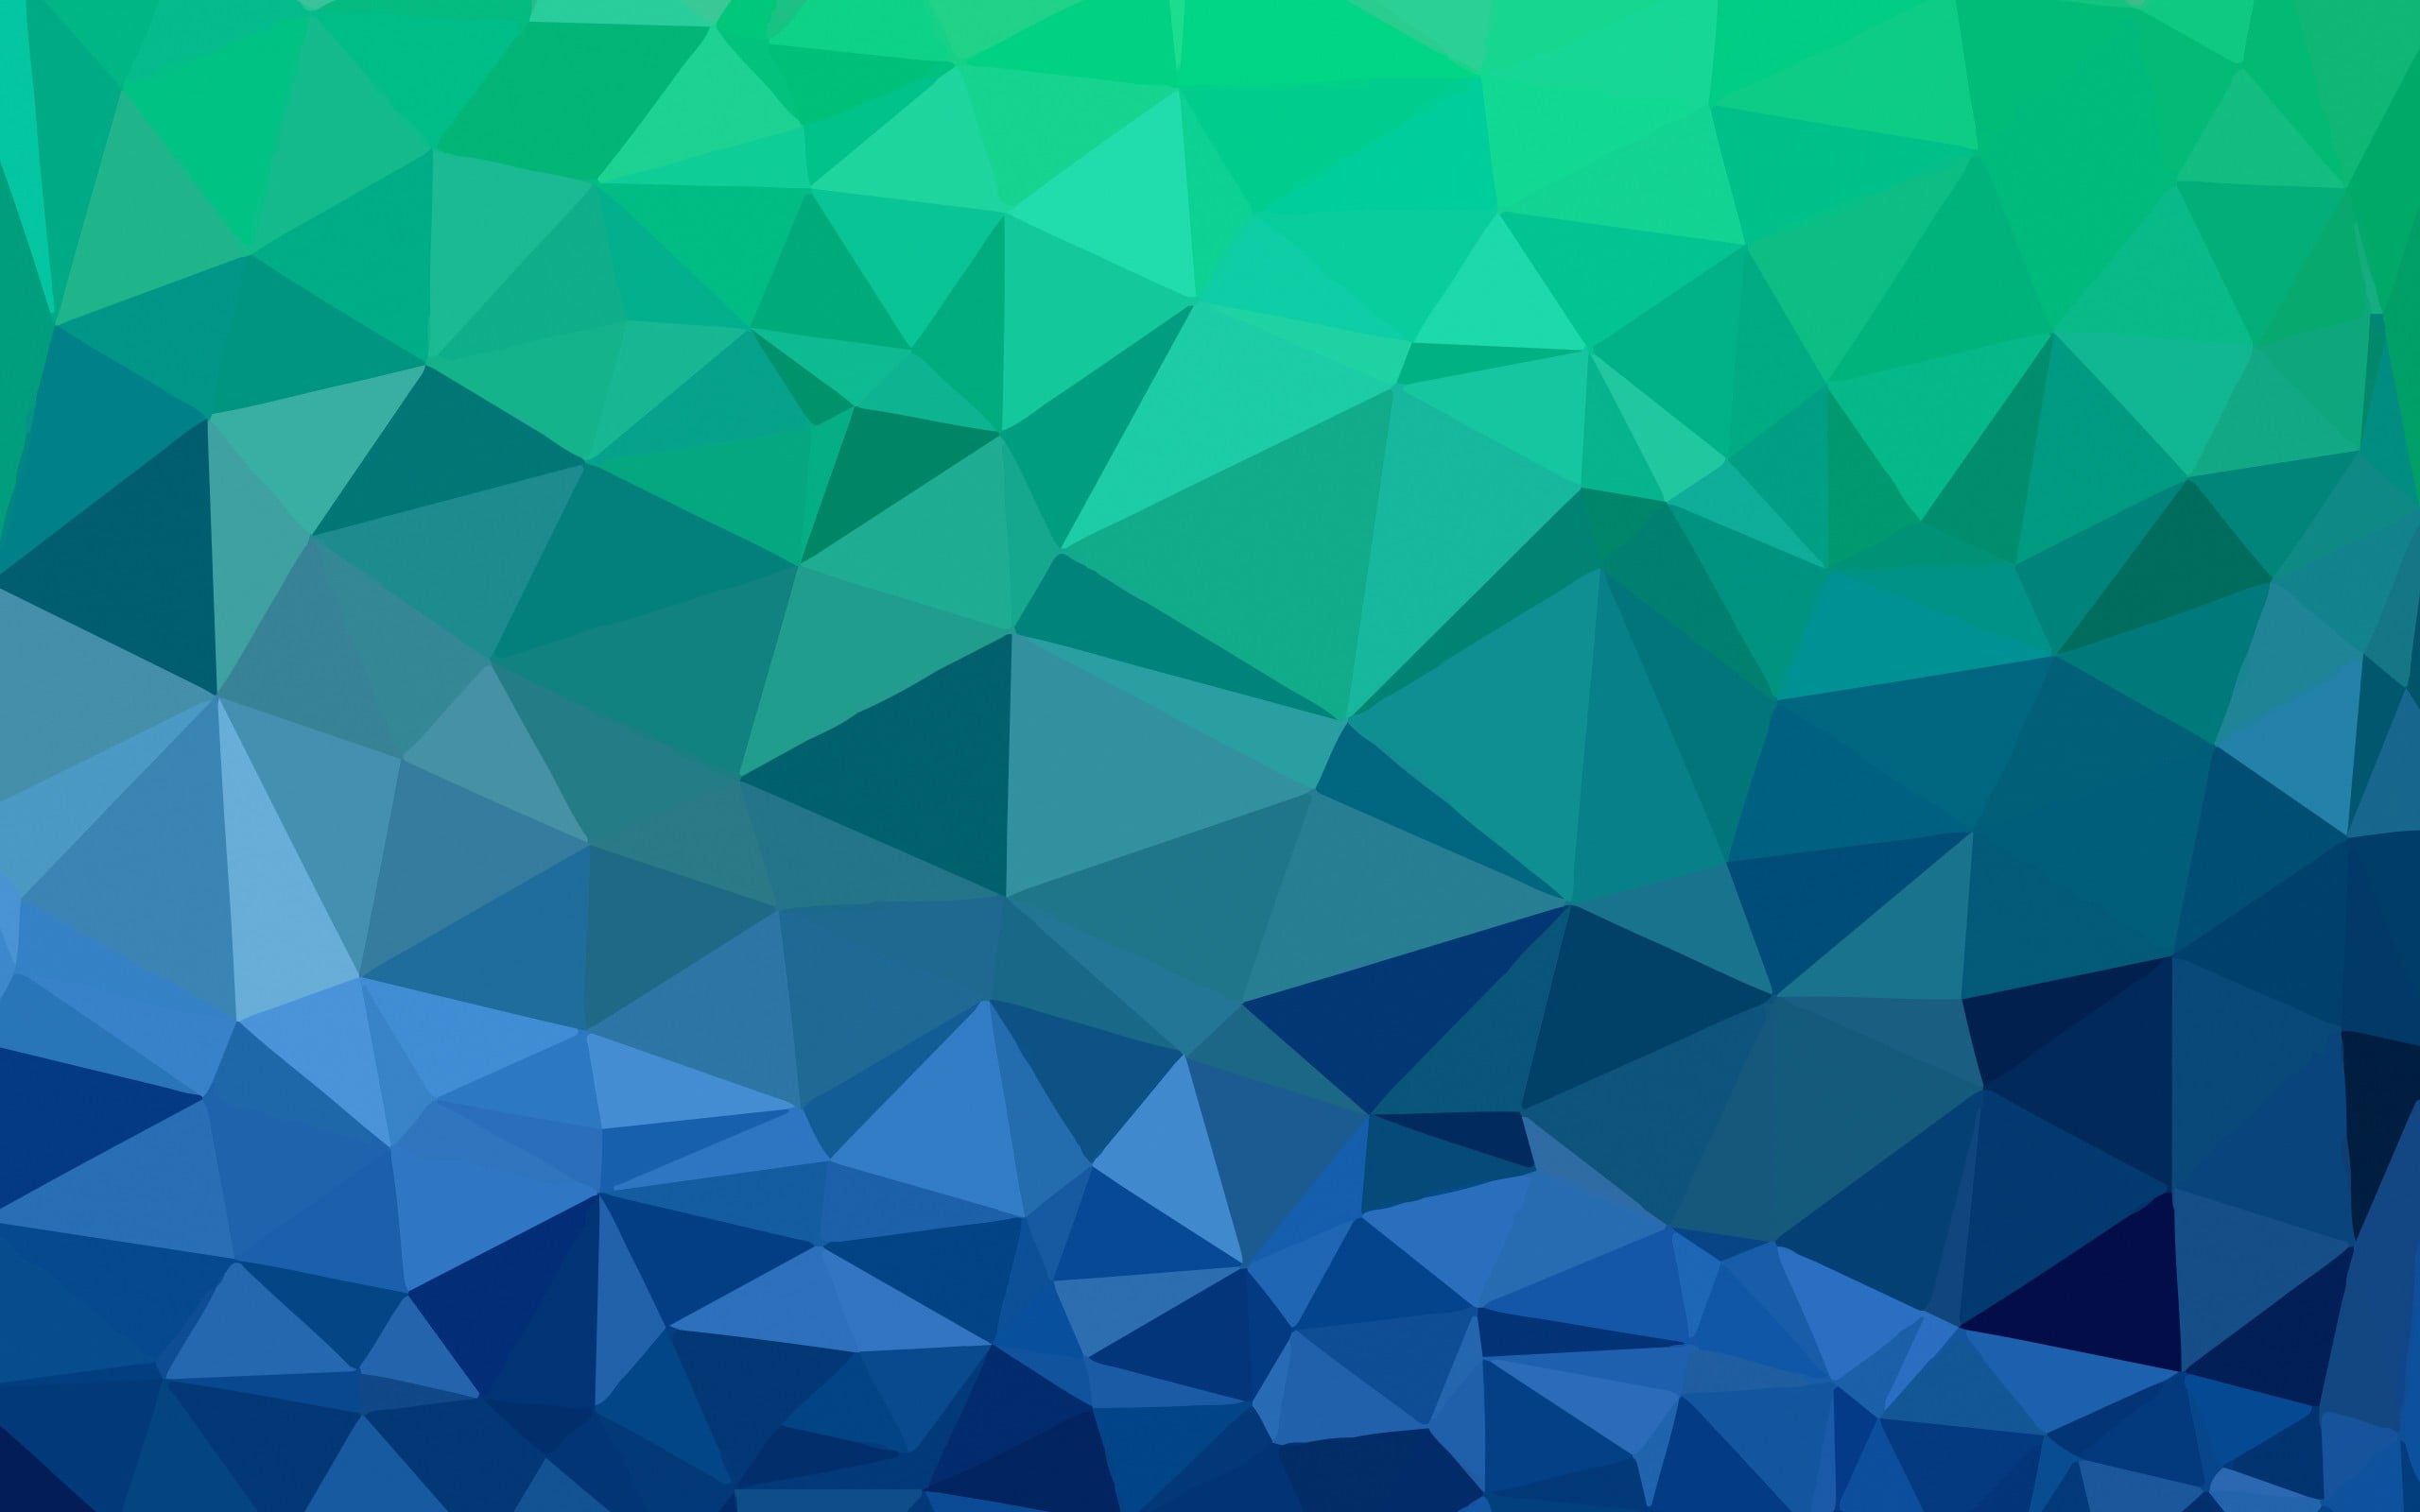 green and blue wallpaper, jjying, low poly, backgrounds, pattern